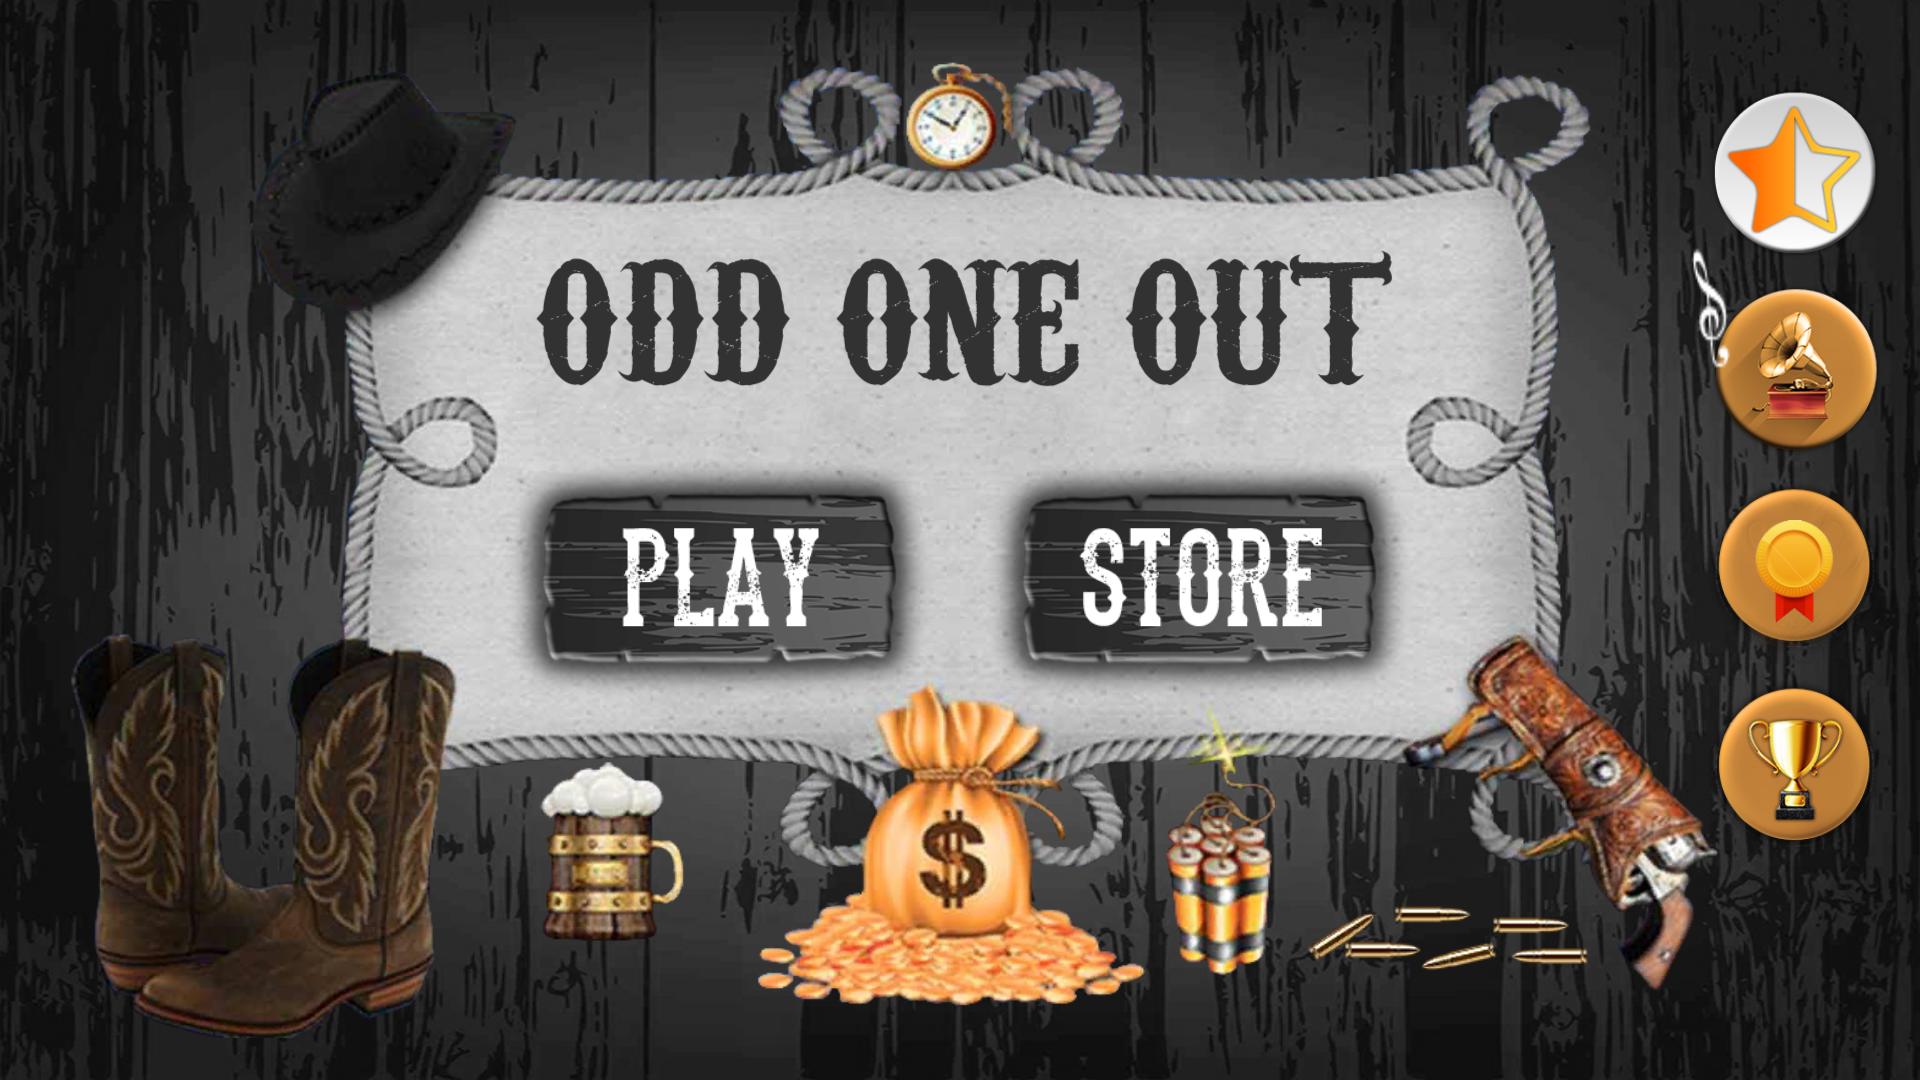 My games out. Odd one out магазин. Odds on игра. Odd one out game. Стейк аут игра.